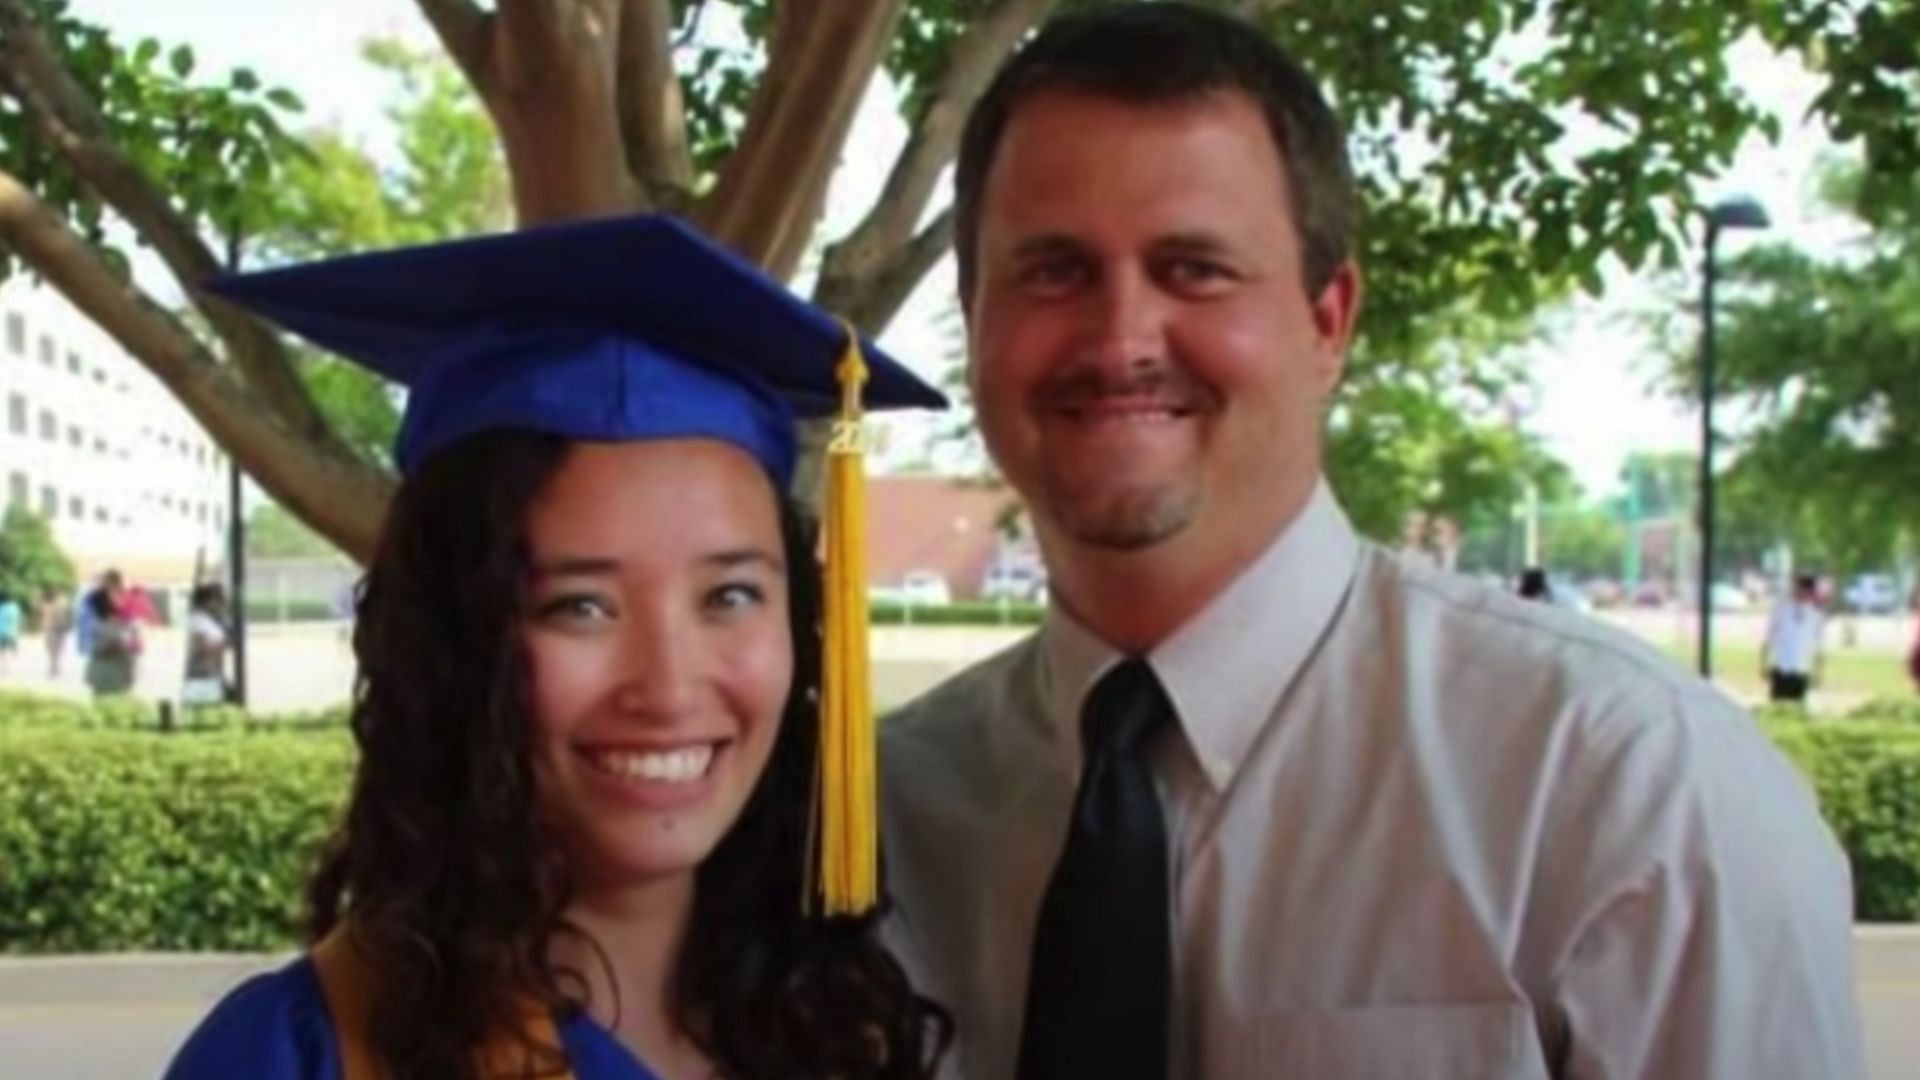 Anjelica &quot;AJ&quot; Hadsell with her stepfather Wesley Hadsell, who was convicted for murdering her (Image via Stephanie Harlowe/YouTube)